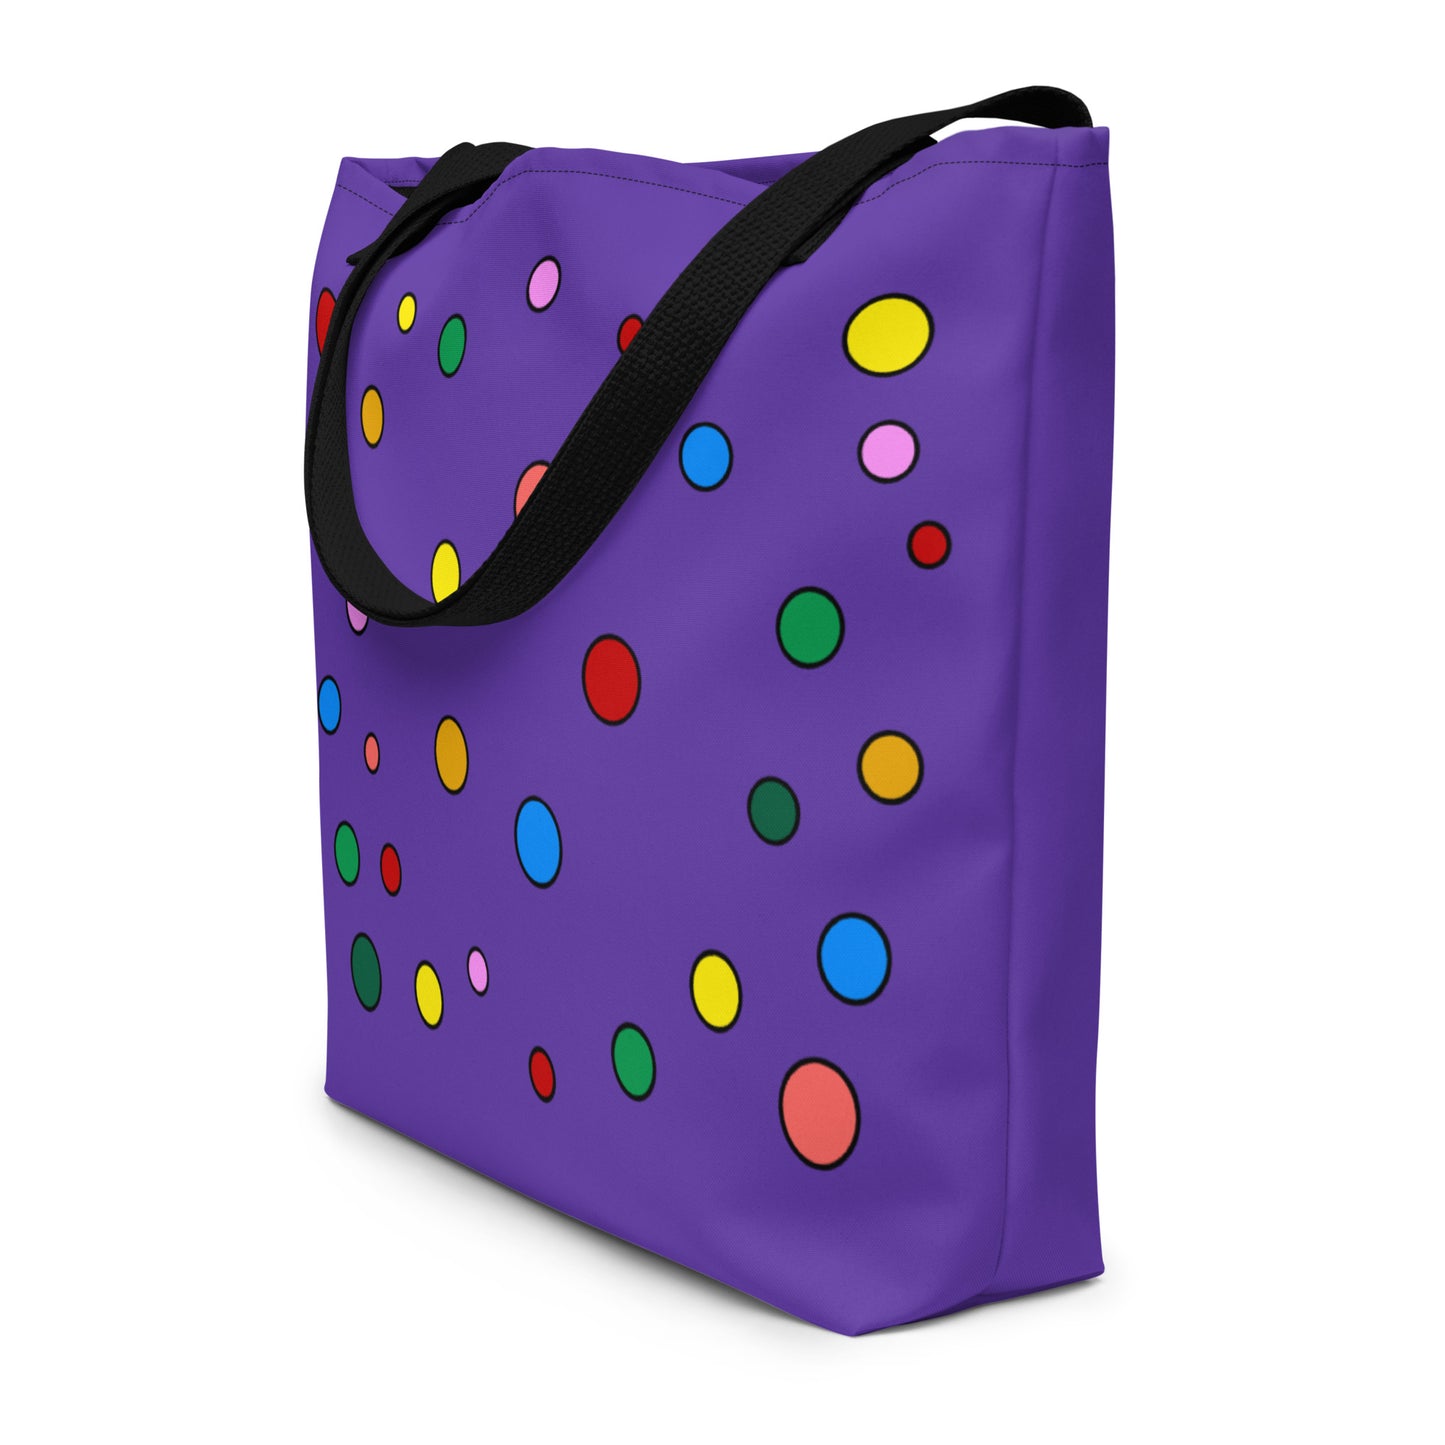 vibrant, colorful purple tote bag with multicolored polka dot design and black cotton handles.